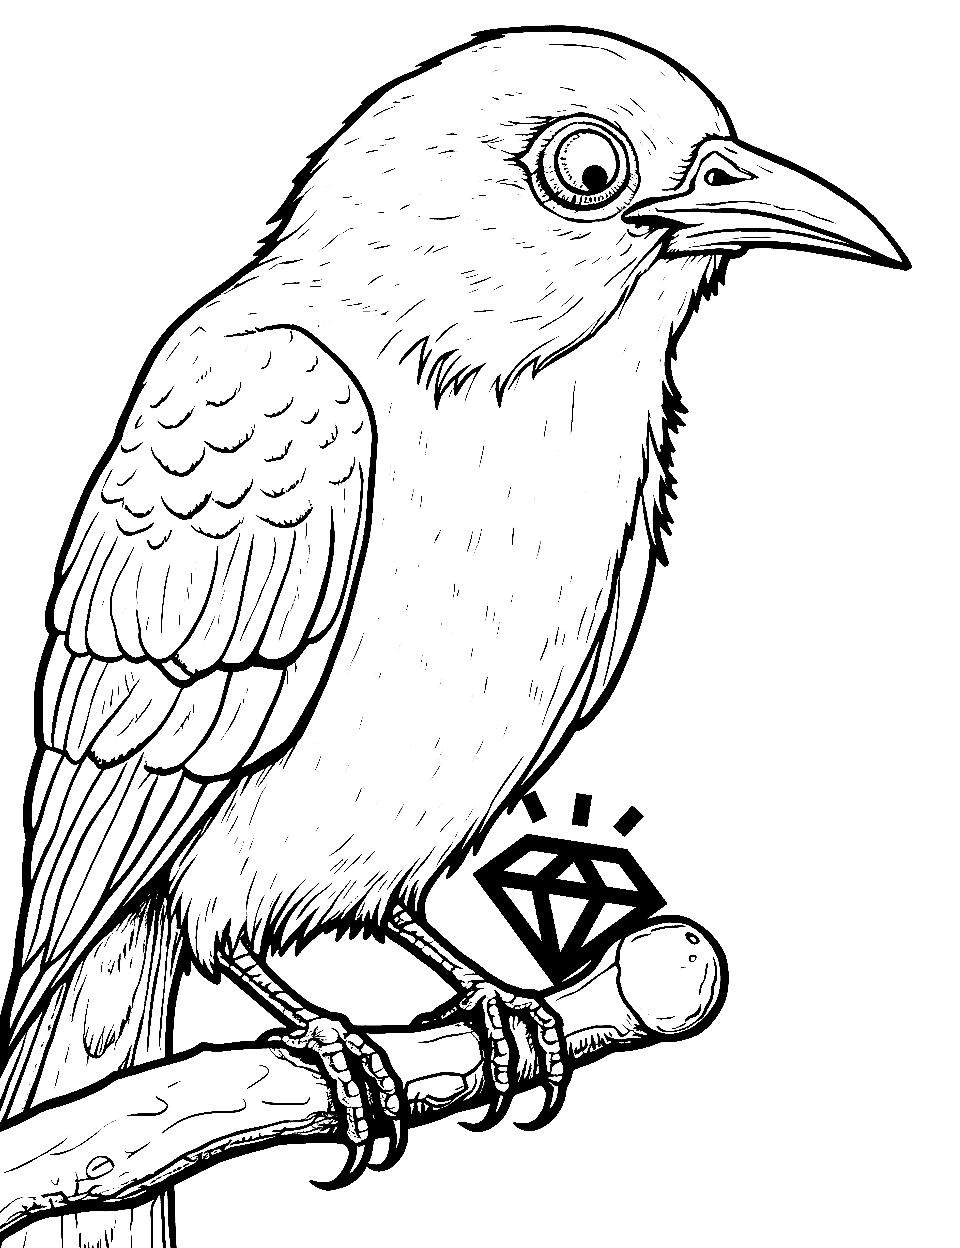 Crow's Shiny Obsession Coloring Page - A crow eyeing a shiny object with interest.